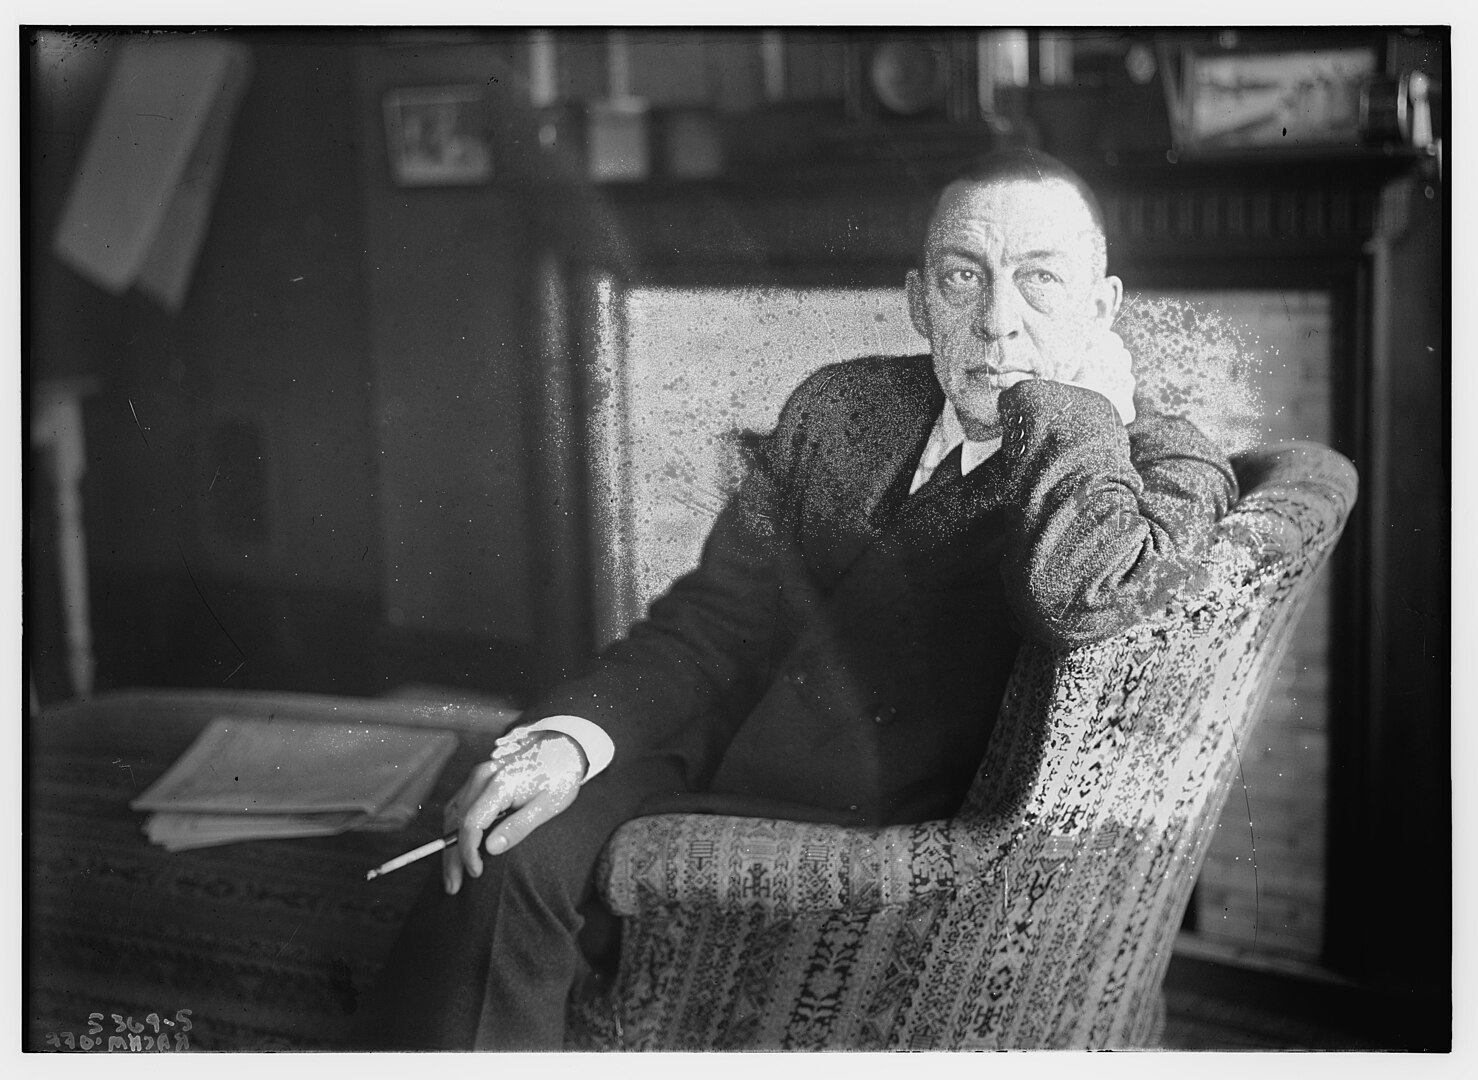 A black and white photo of the composer Rachmaninoff sitting in a chair, resting his head against his hand, with a cigarette in the other, his expression pensive.